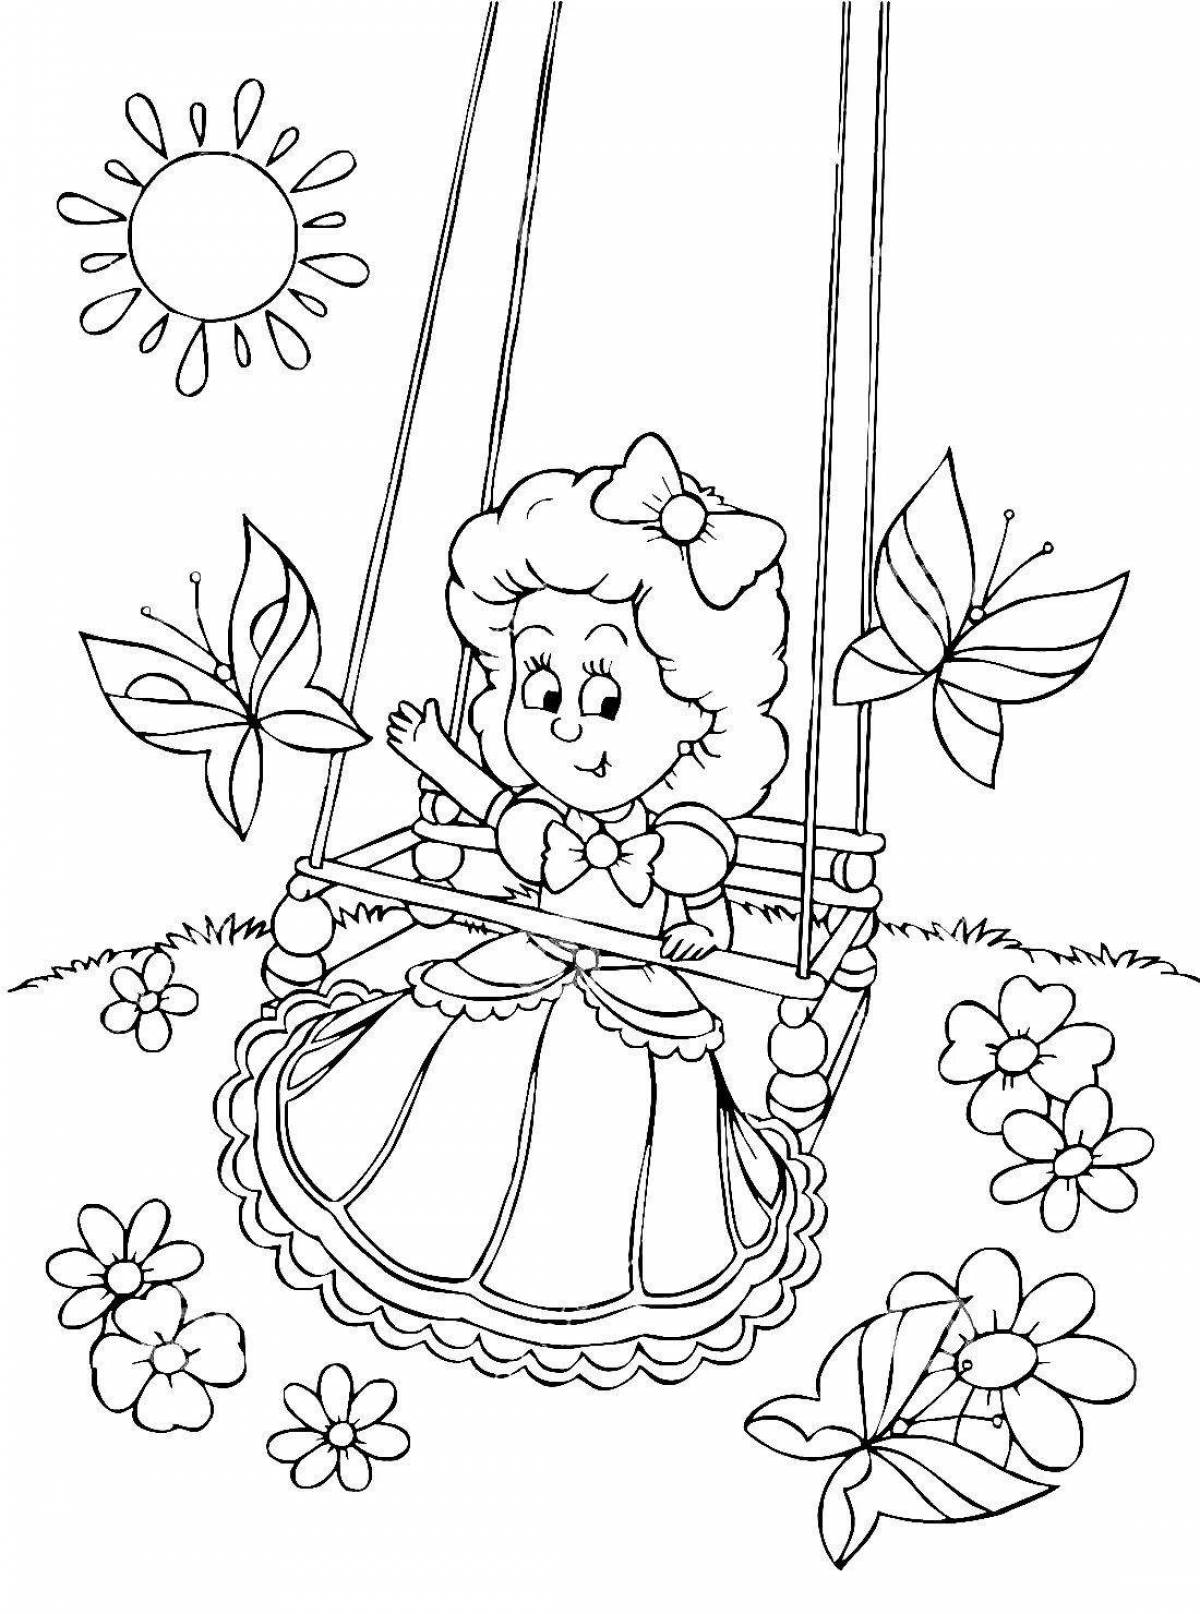 Coloring swings for the little ones